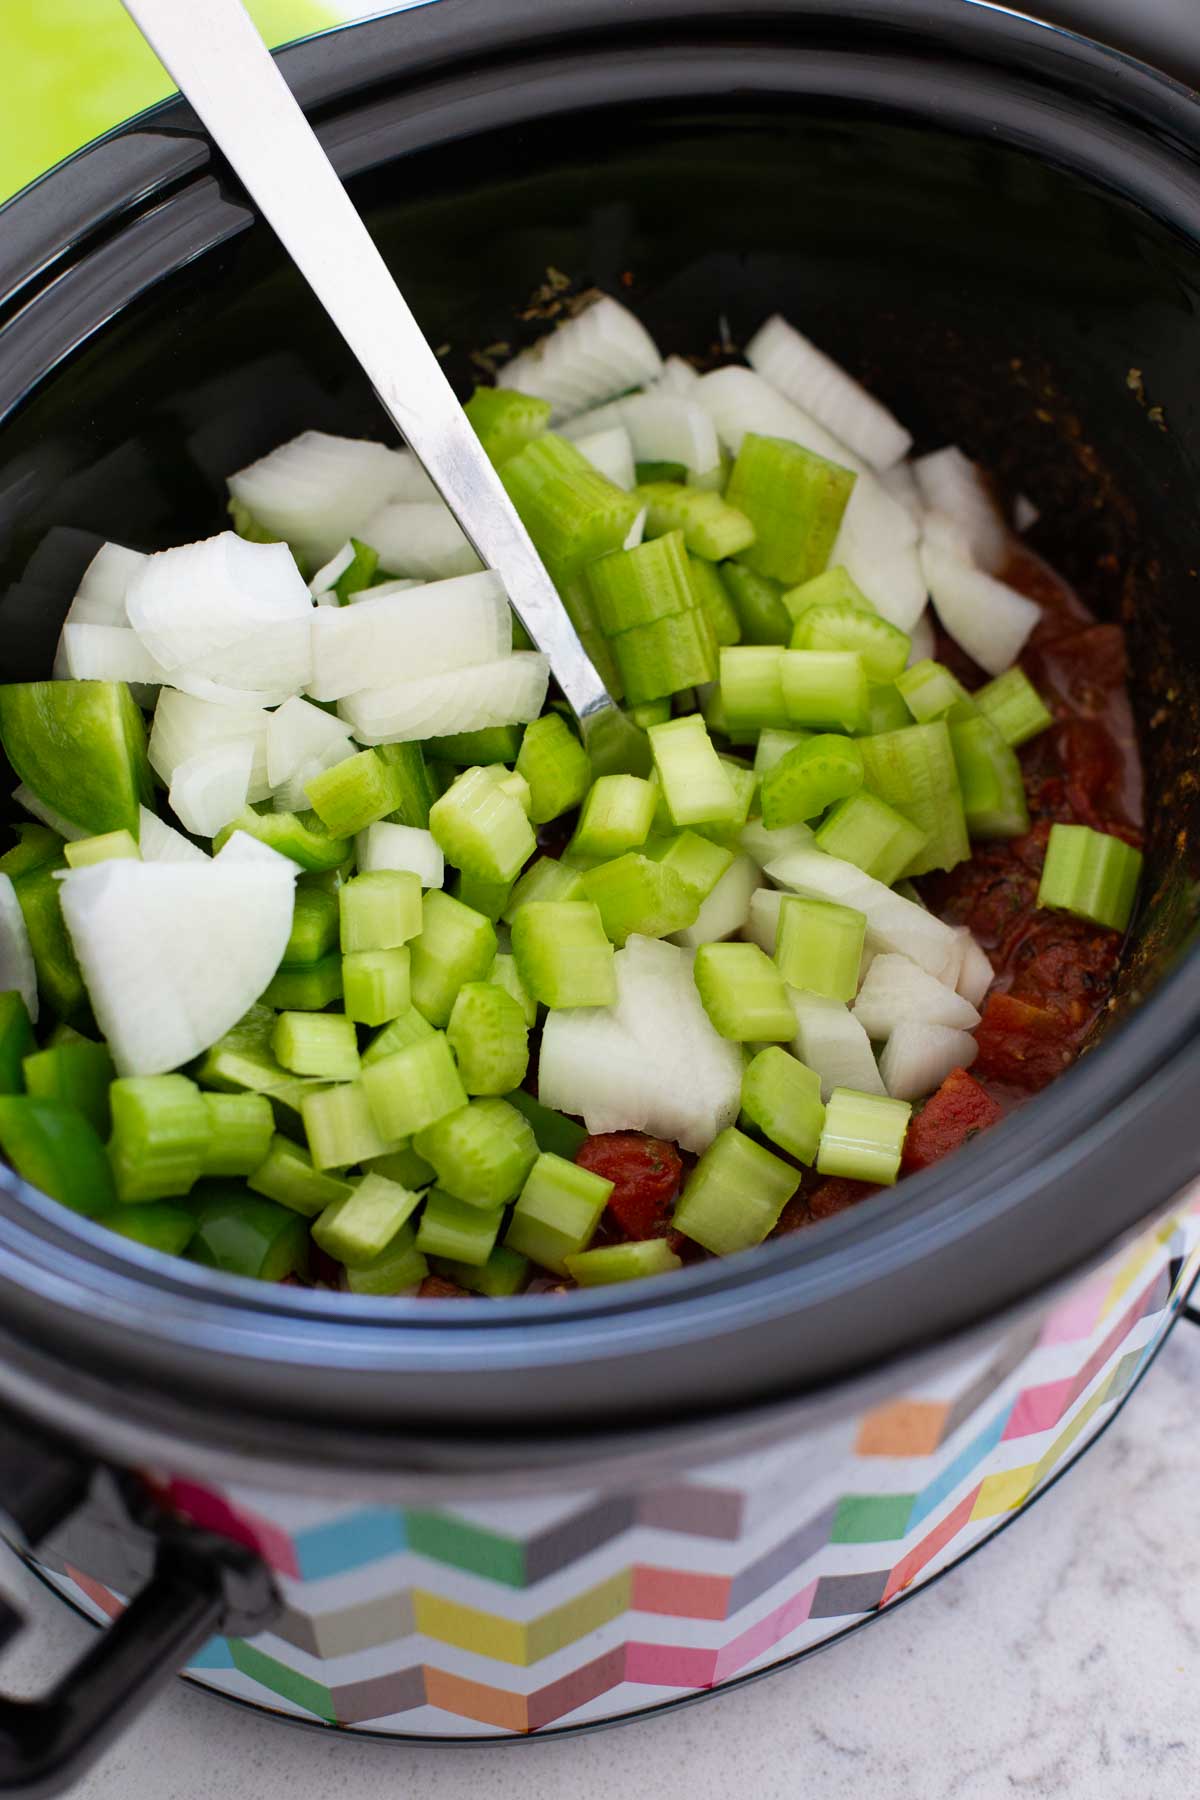 The diced onion and fresh celery are mixed in.